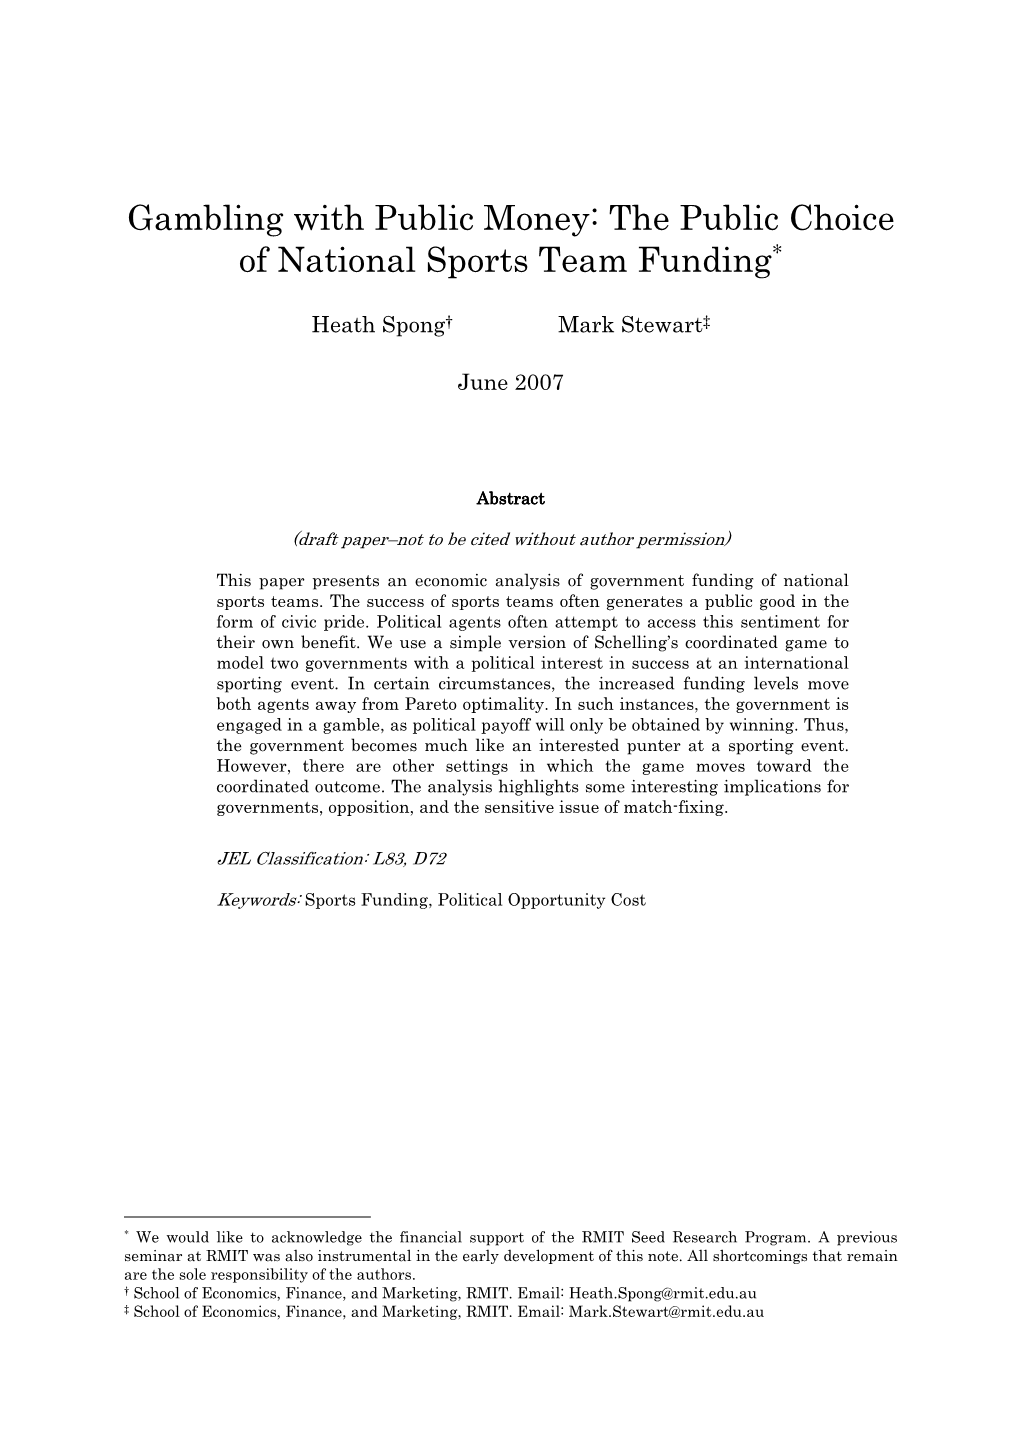 Gambling with Public Money: the Public Choice of National Sports Team Funding ∗